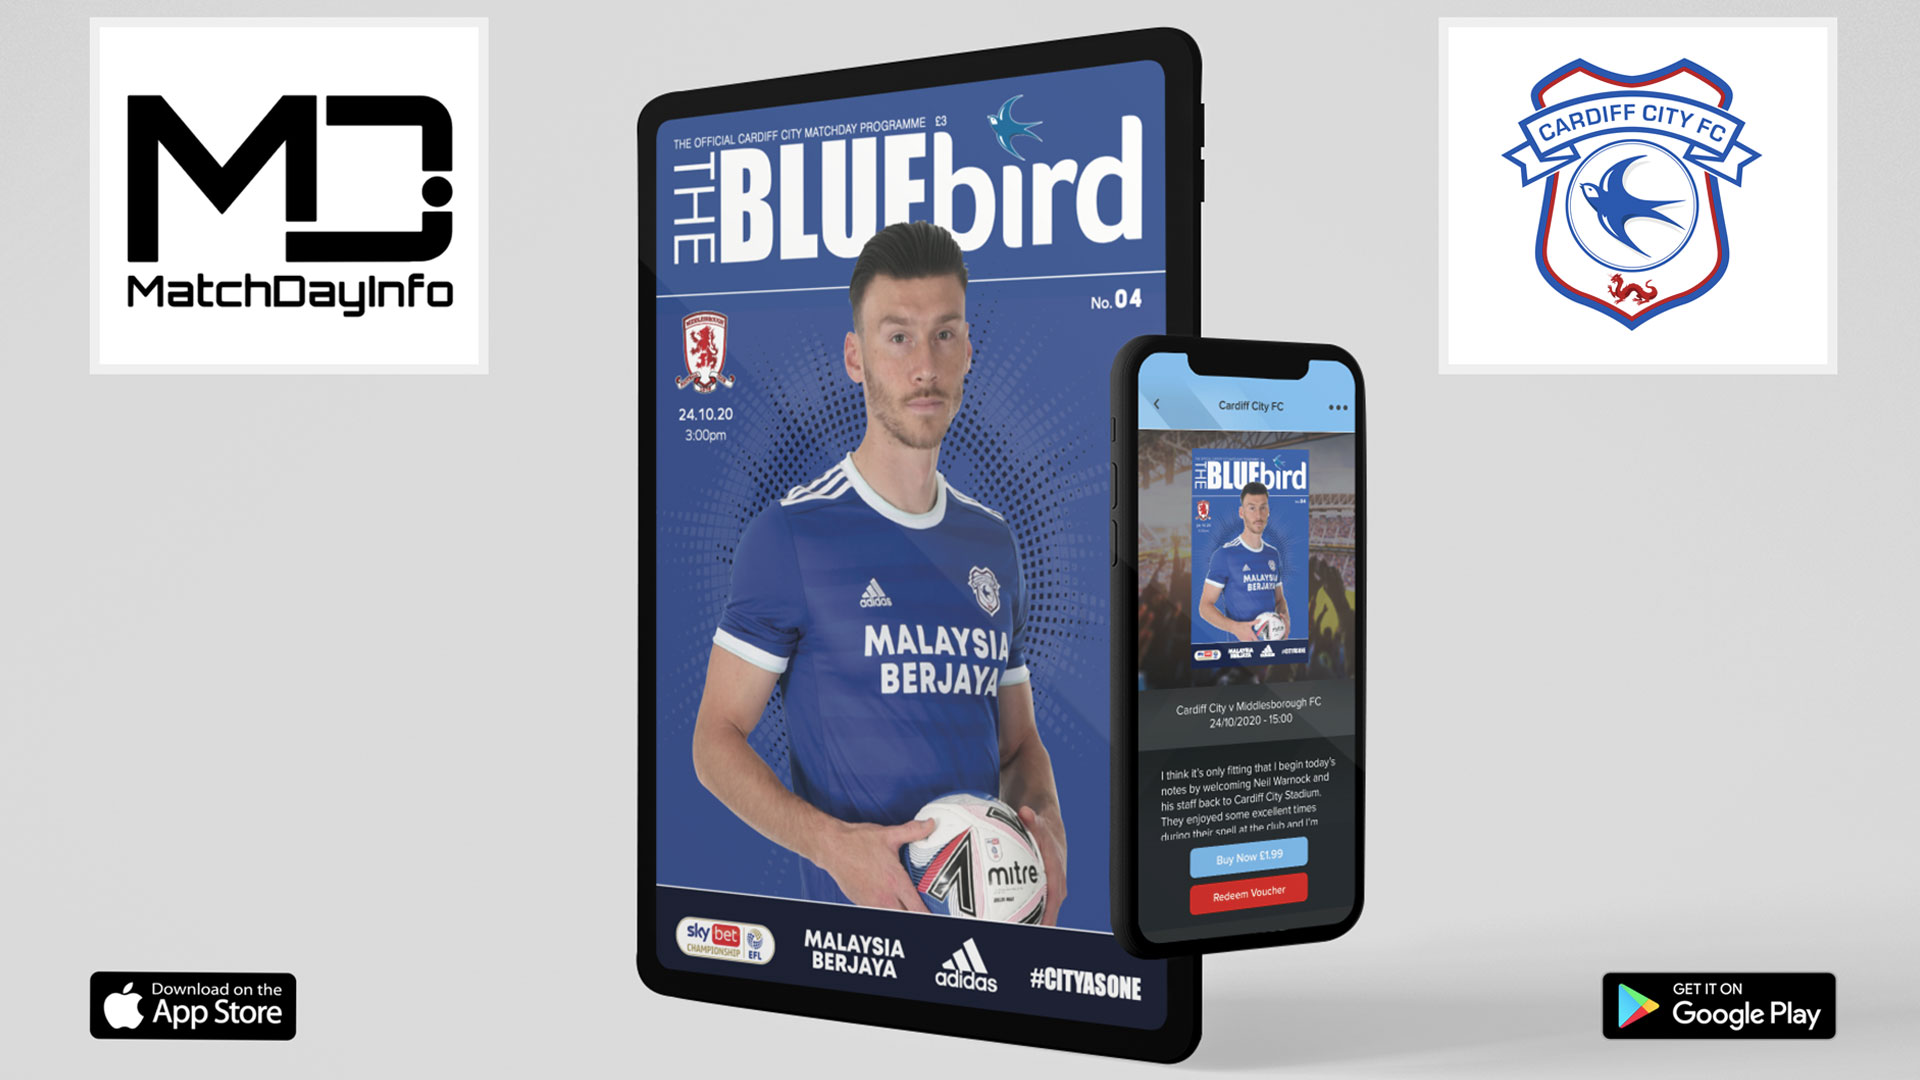 The Bluebird is now available to be downloaded...